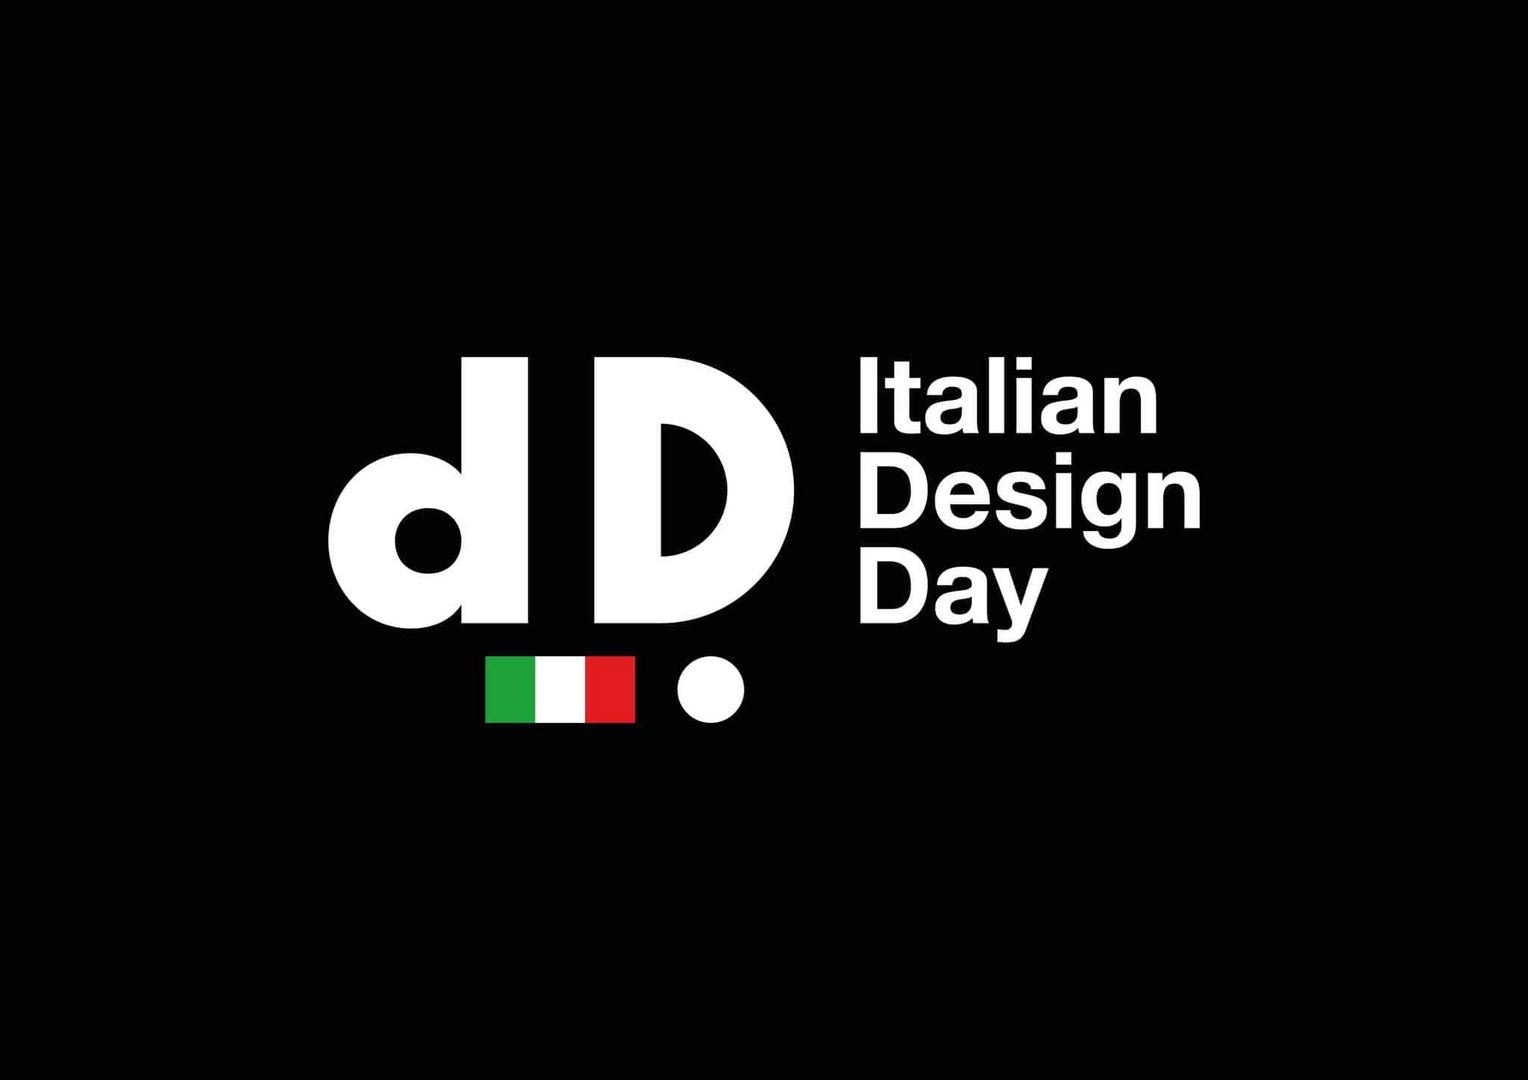 Cyprus News Digest: Italian Design Day is celebrated in Cyprus | Cyprus ...